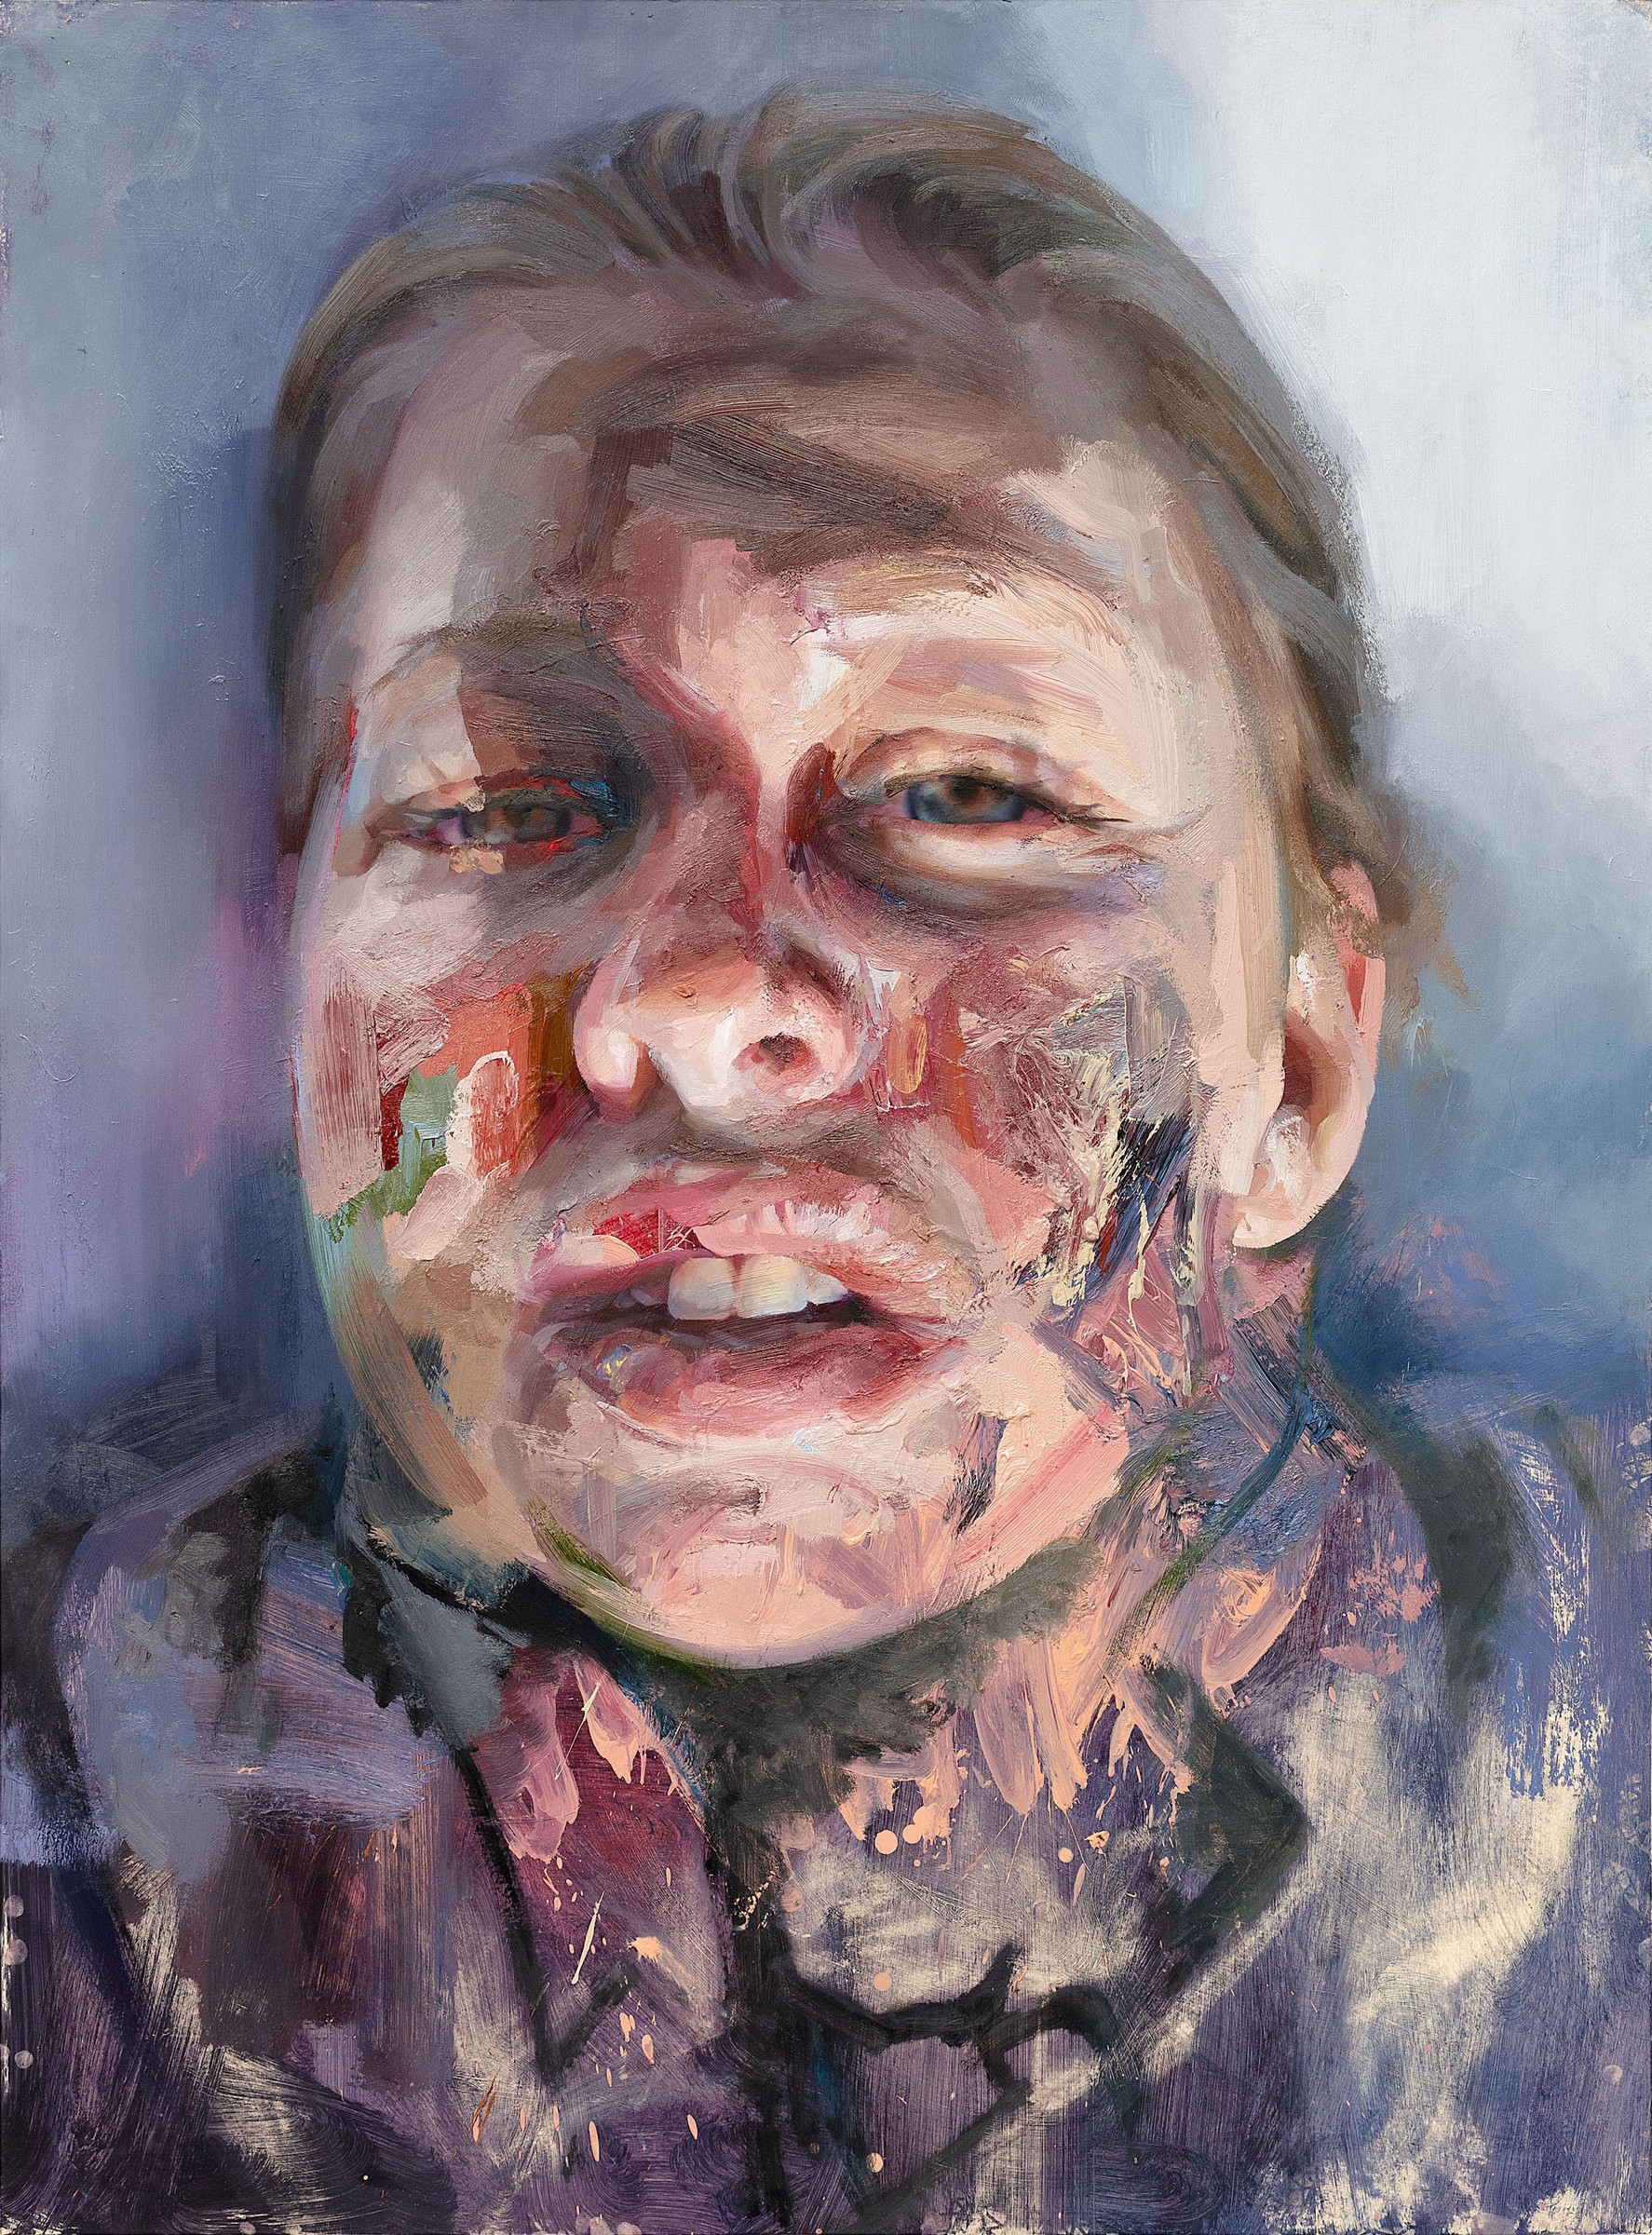 Jenny Saville | Painting the Self | Interview | Gagosian Quarterly